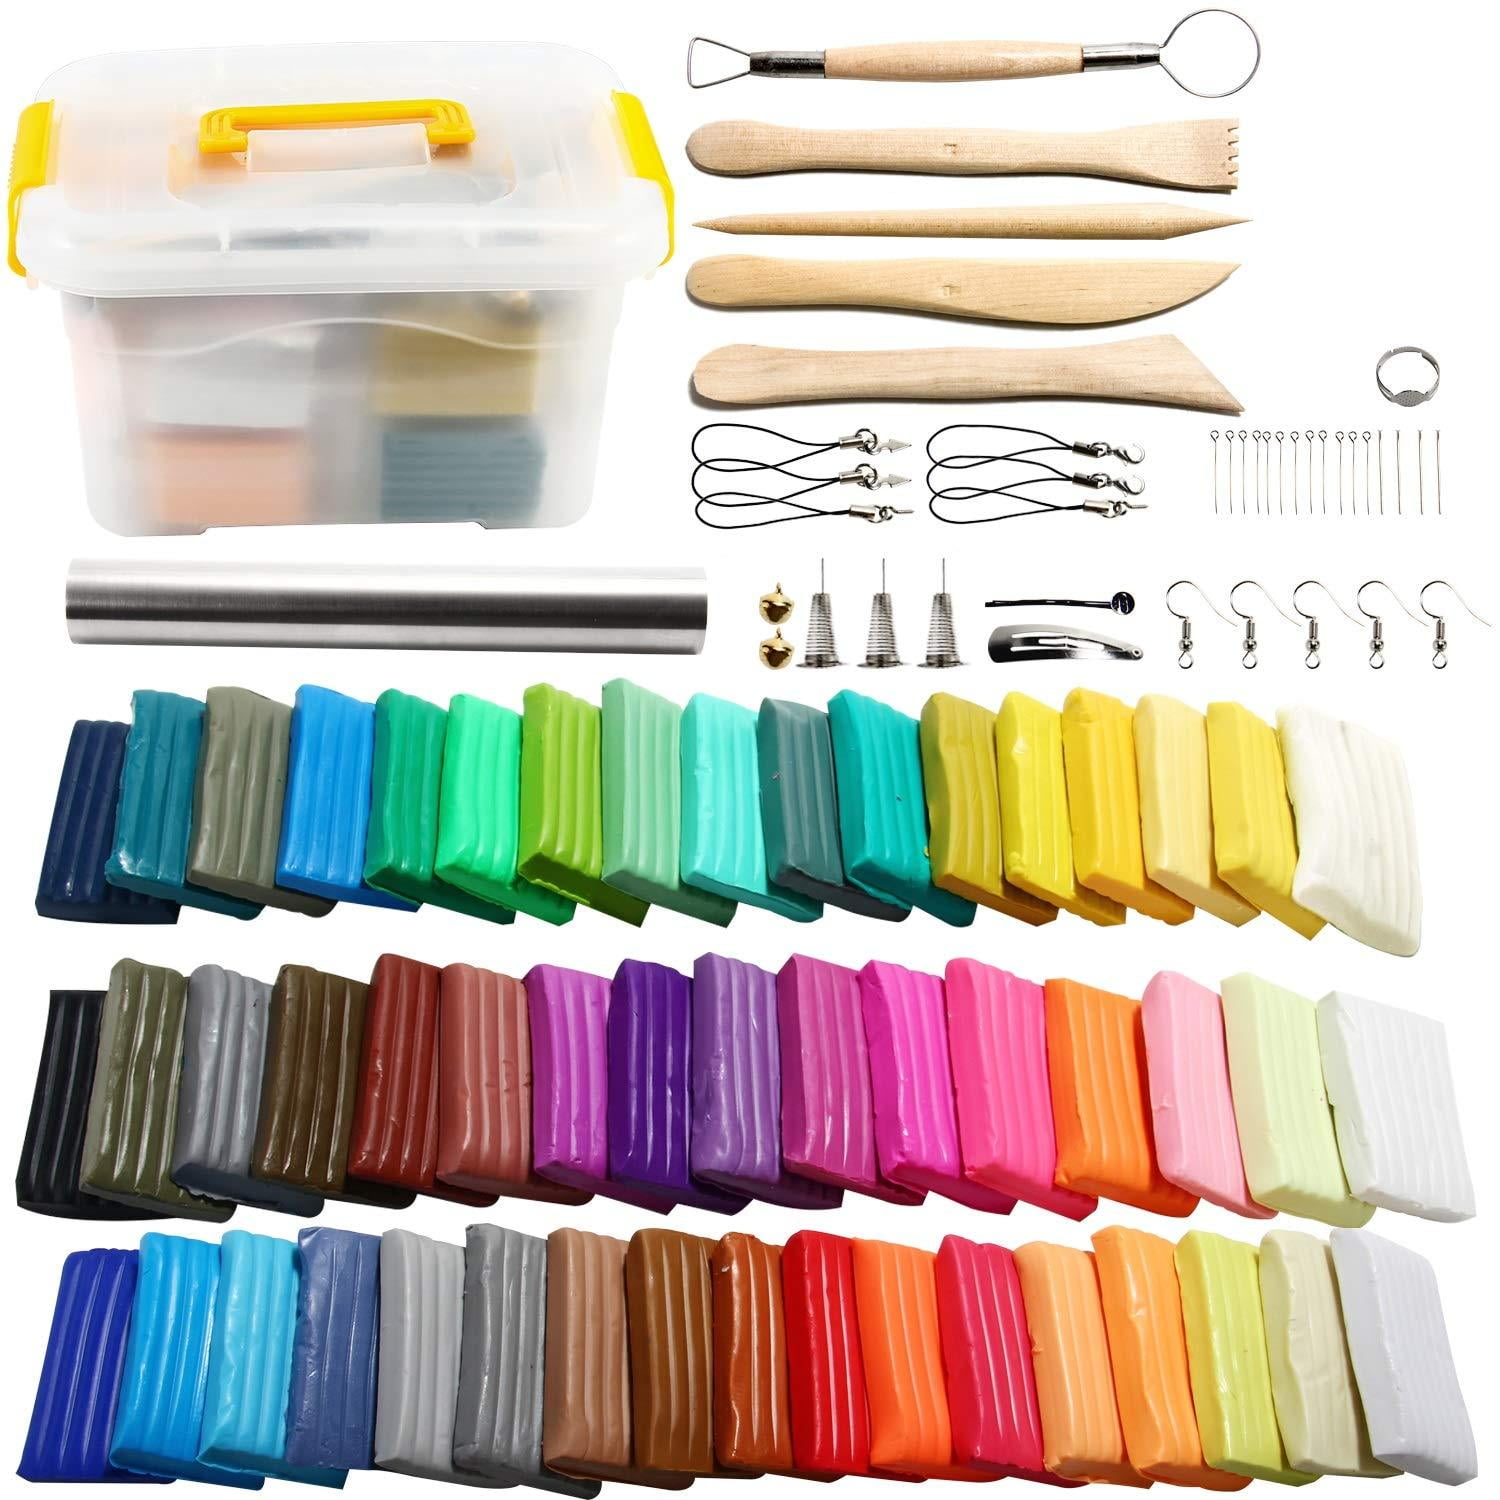 Polymer Clay Kit,DAOFARY 50 Color Modeling Clay Kit DIY Oven Bake Clay for  Kids and Adults with 5 Sculpting Tools, Accessories and Portable Storage